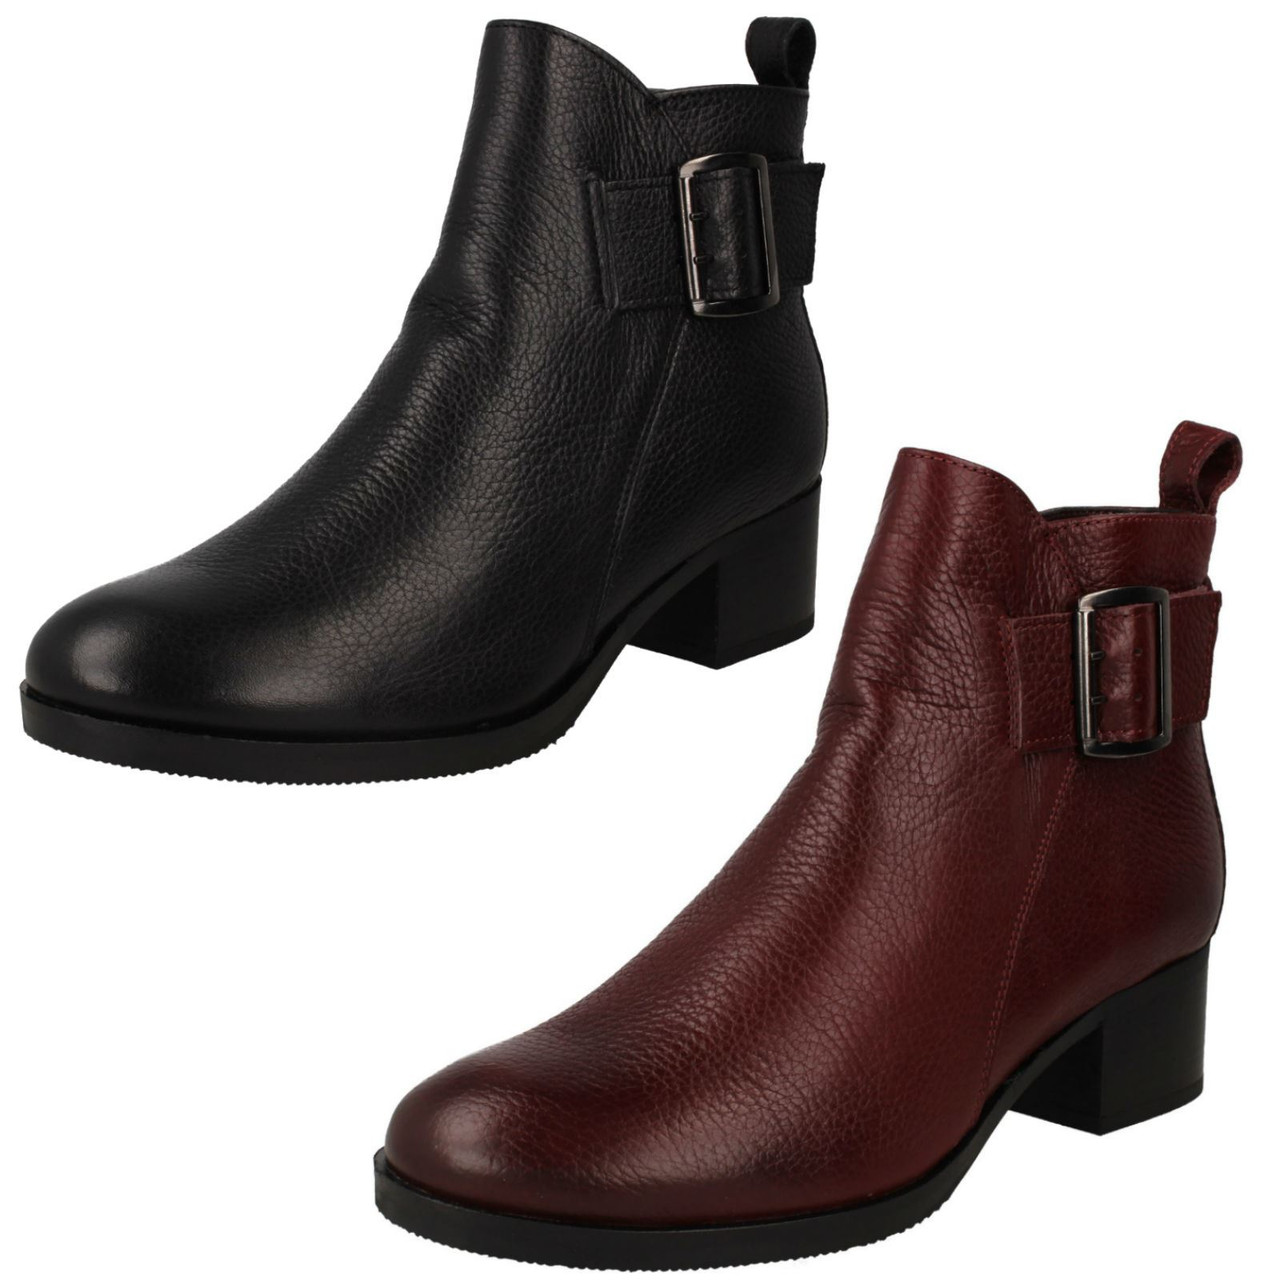 clarks leather ankle boots halia perch